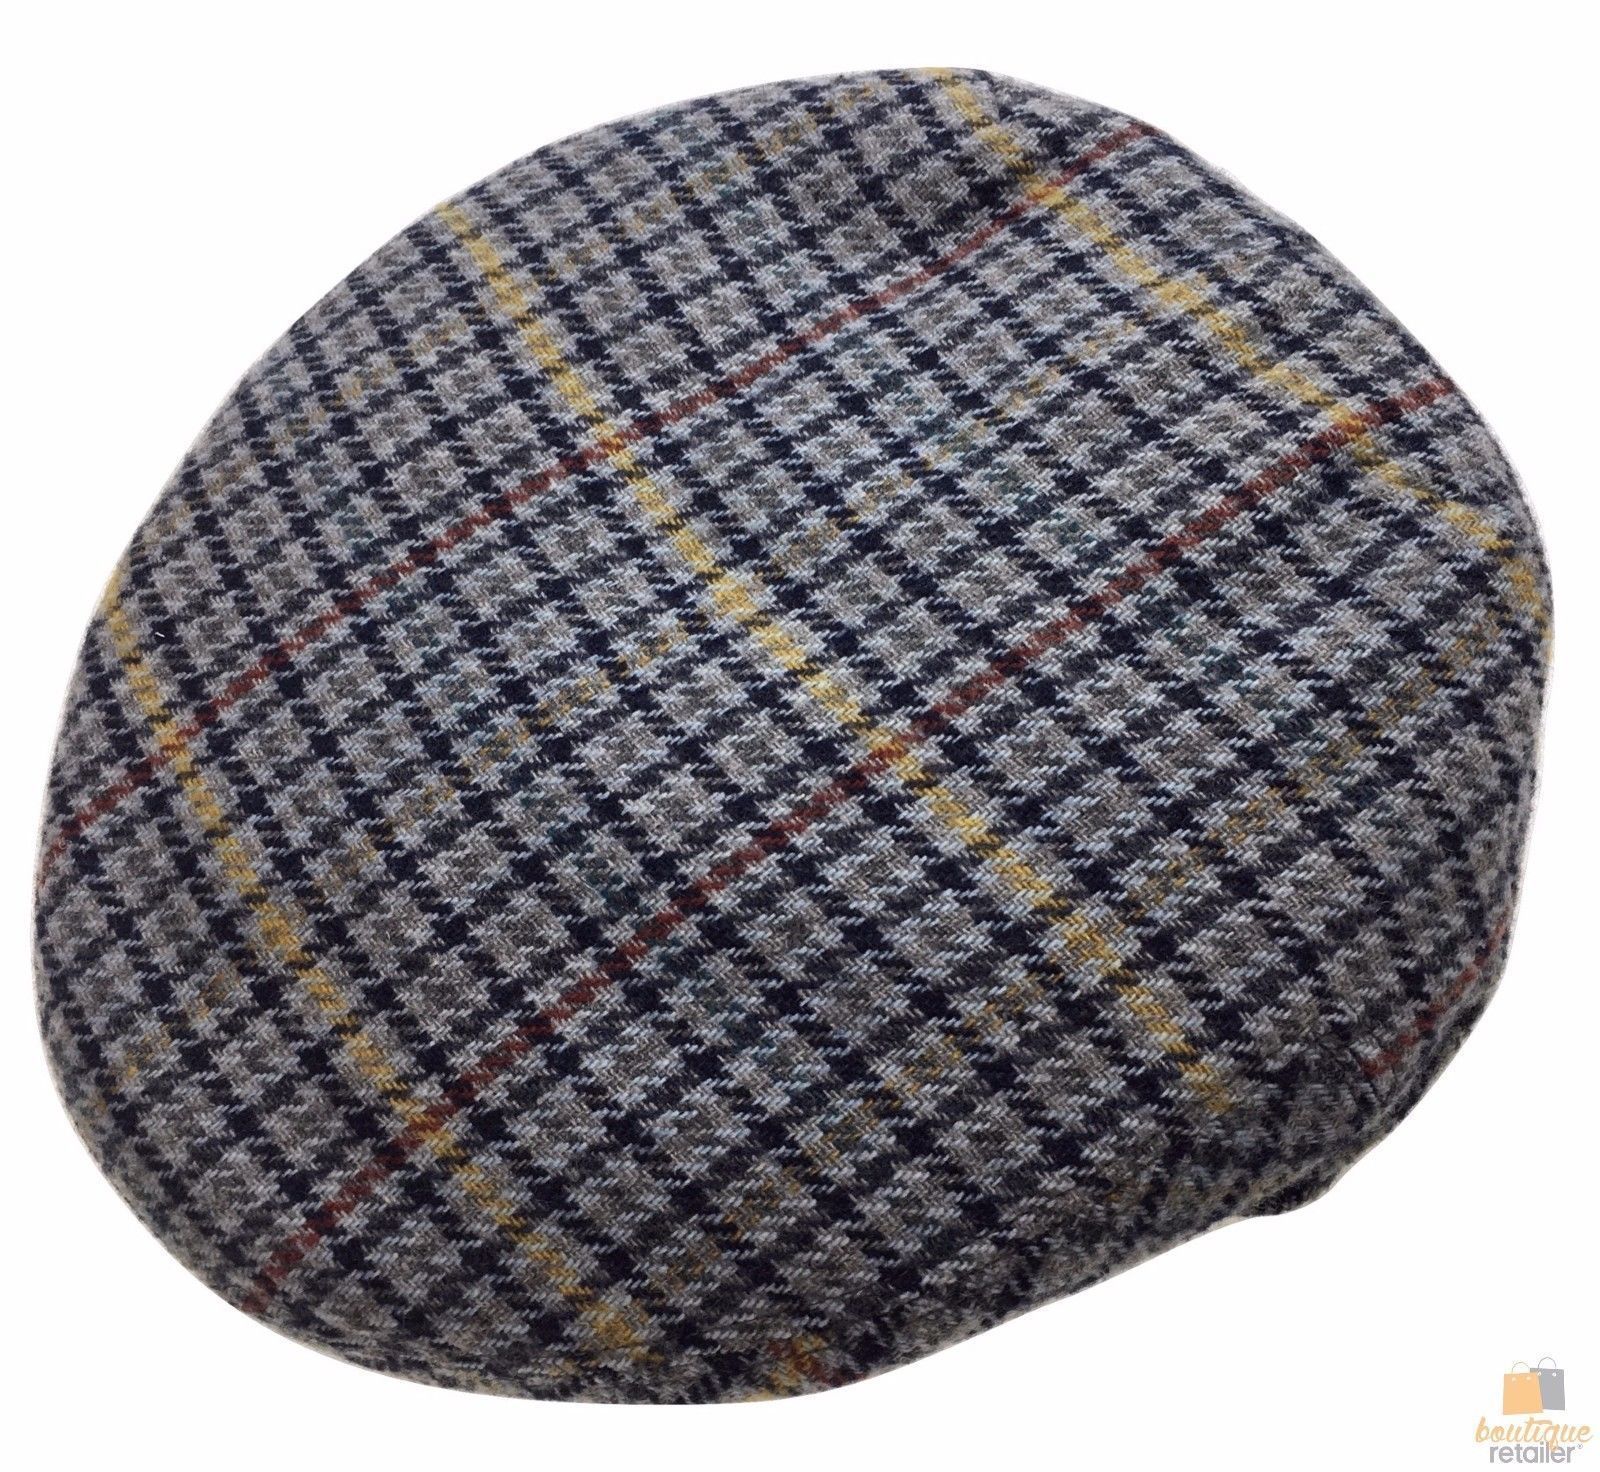 STRATFORD English Tweed Country Flat Cap Mens Driving Hat Wool Classic 2248